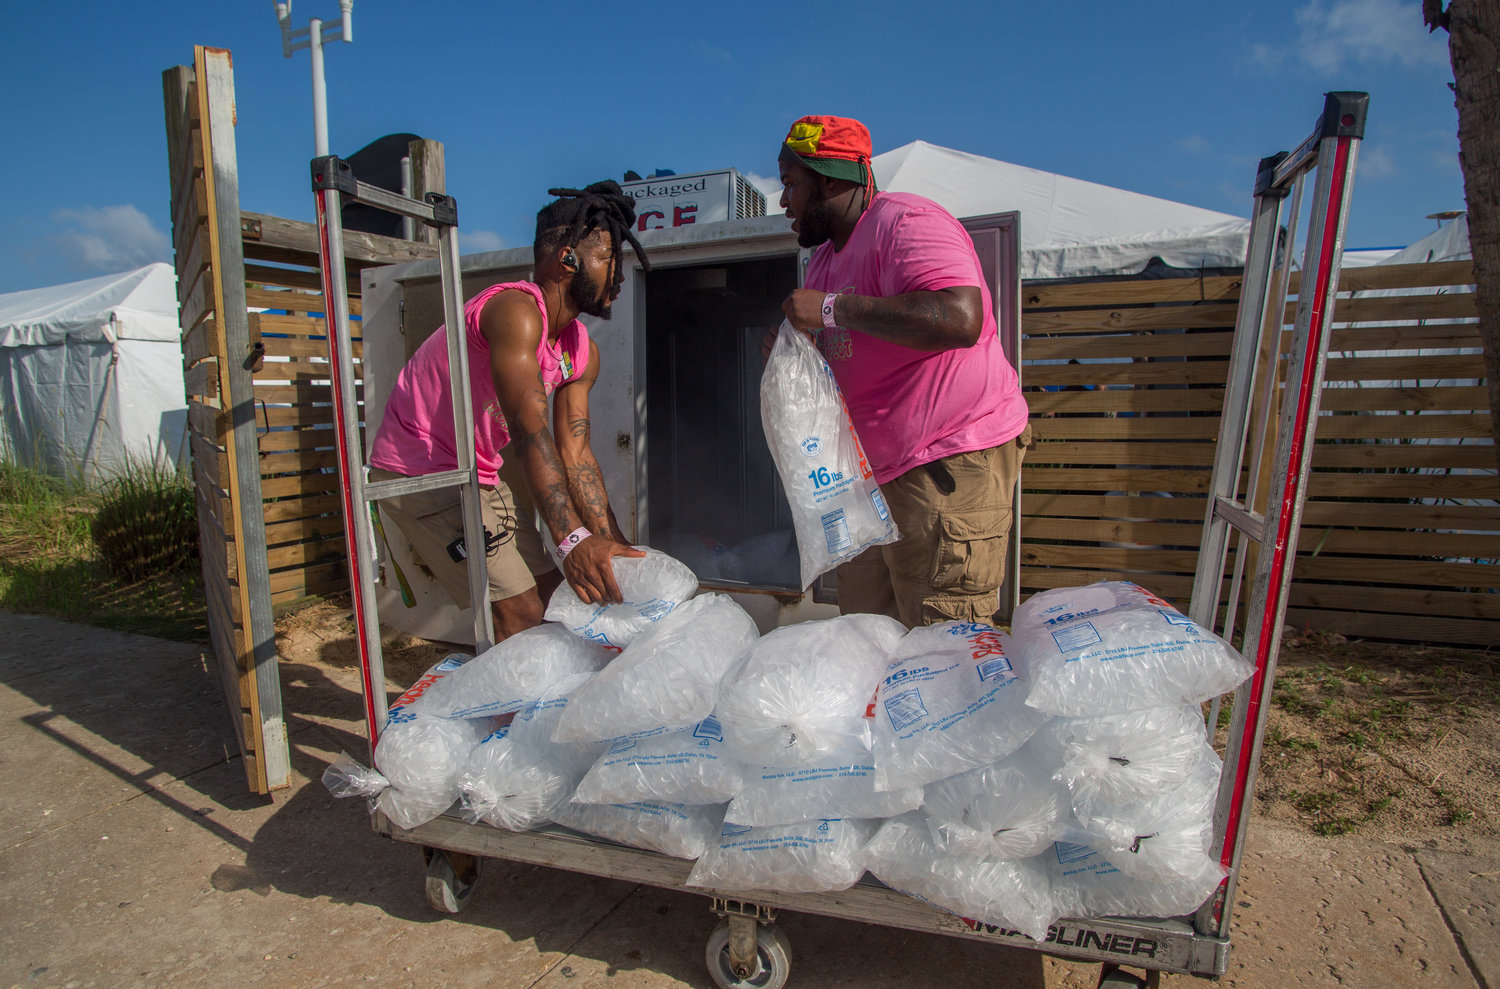 Festival workers stock ice at Hangout Music Festival on Friday, May 20.